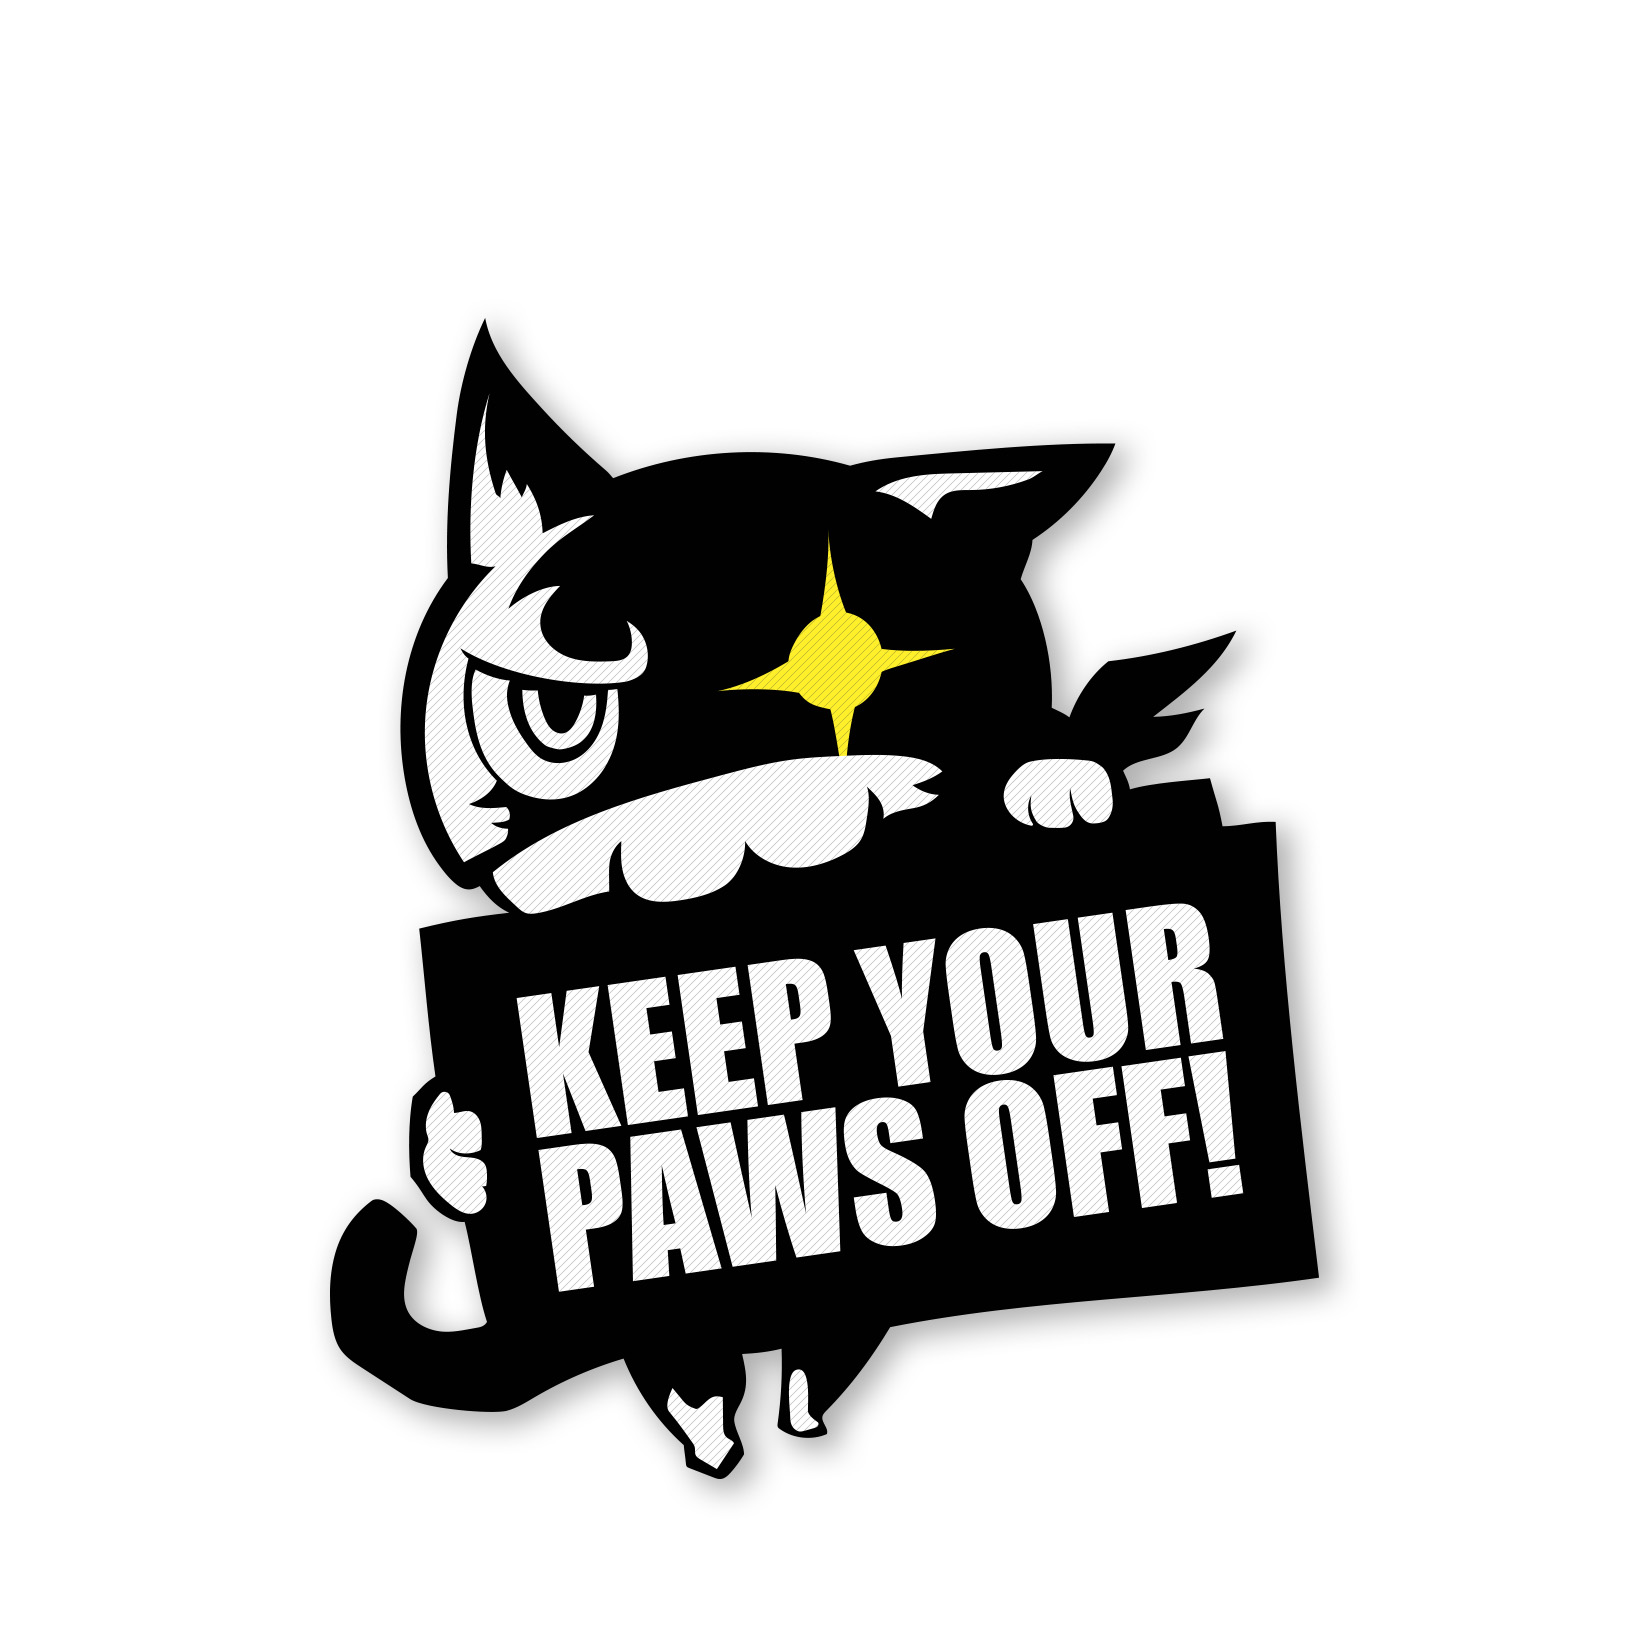 Keep Your Paws Off! - HeartBeat Los Angeles